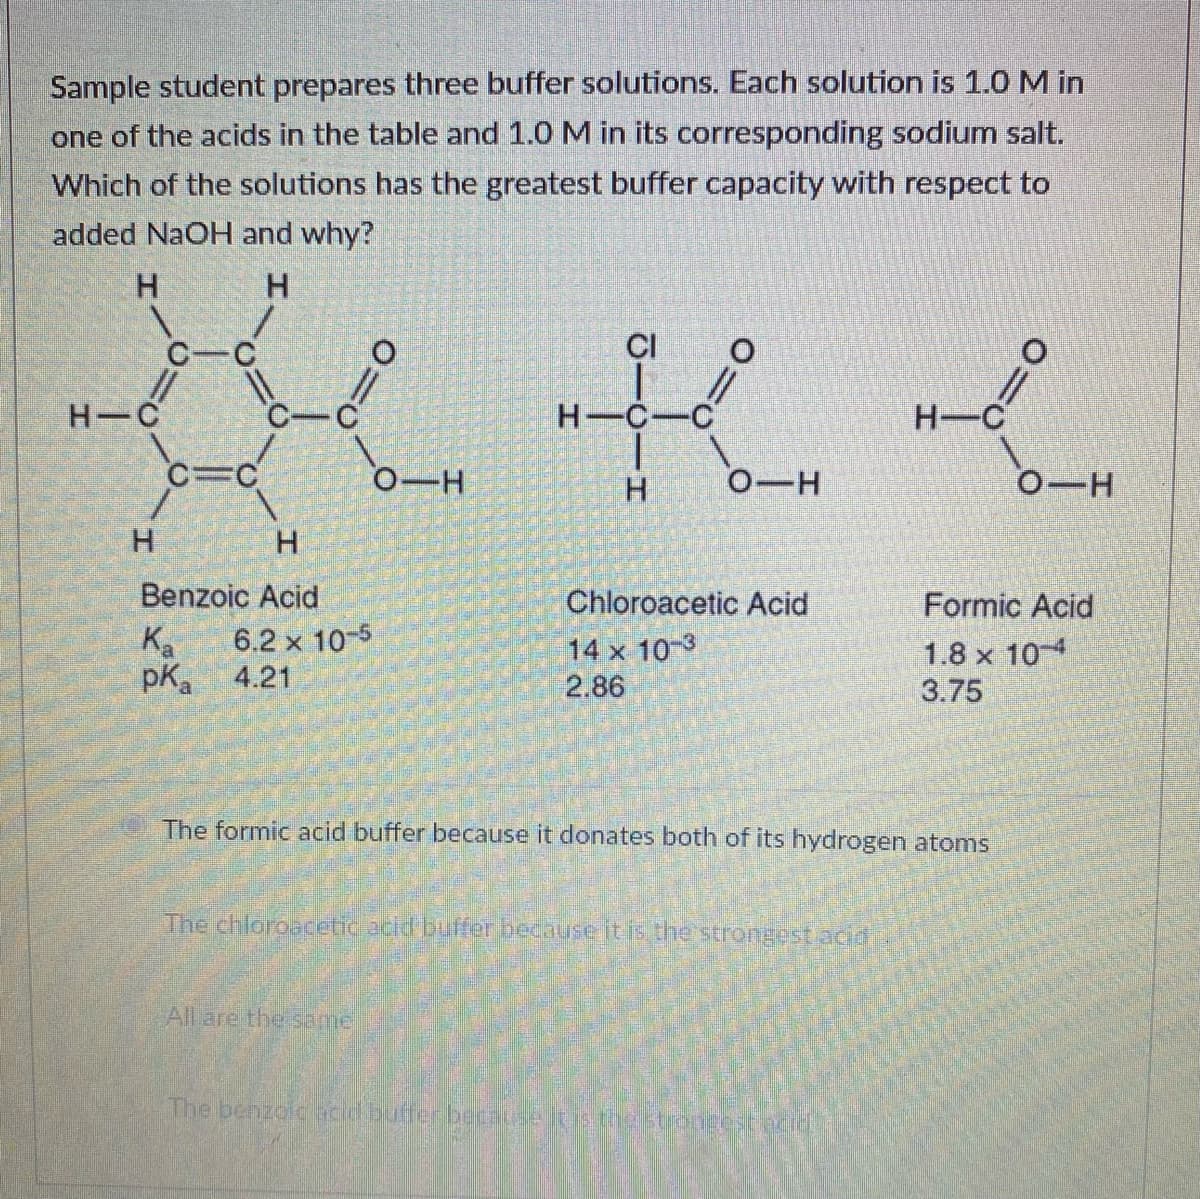 Sample student prepares three buffer solutions. Each solution is 1.0 M in
one of the acids in the table and 1.0 M in its corresponding sodium salt.
Which of the solutions has the greatest buffer capacity with respect to
added NaOH and why?
H.
H.
CI
H C
H-C-C
H-C
C=C
0-H
H.
0-H
0-H
Benzoic Acid
Chloroacetic Acid
Formic Acid
Ka
pKa
6.2 x 10-5
4.21
14 x 10-3
2.86
1.8 x 10
3.75
The formic acid buffer because it donates both of its hydrogen atoms
The chloroacetic acld buffer becauseitis the strongest acid
All are the same
The benzolc acd butfer because lis testongestecid
